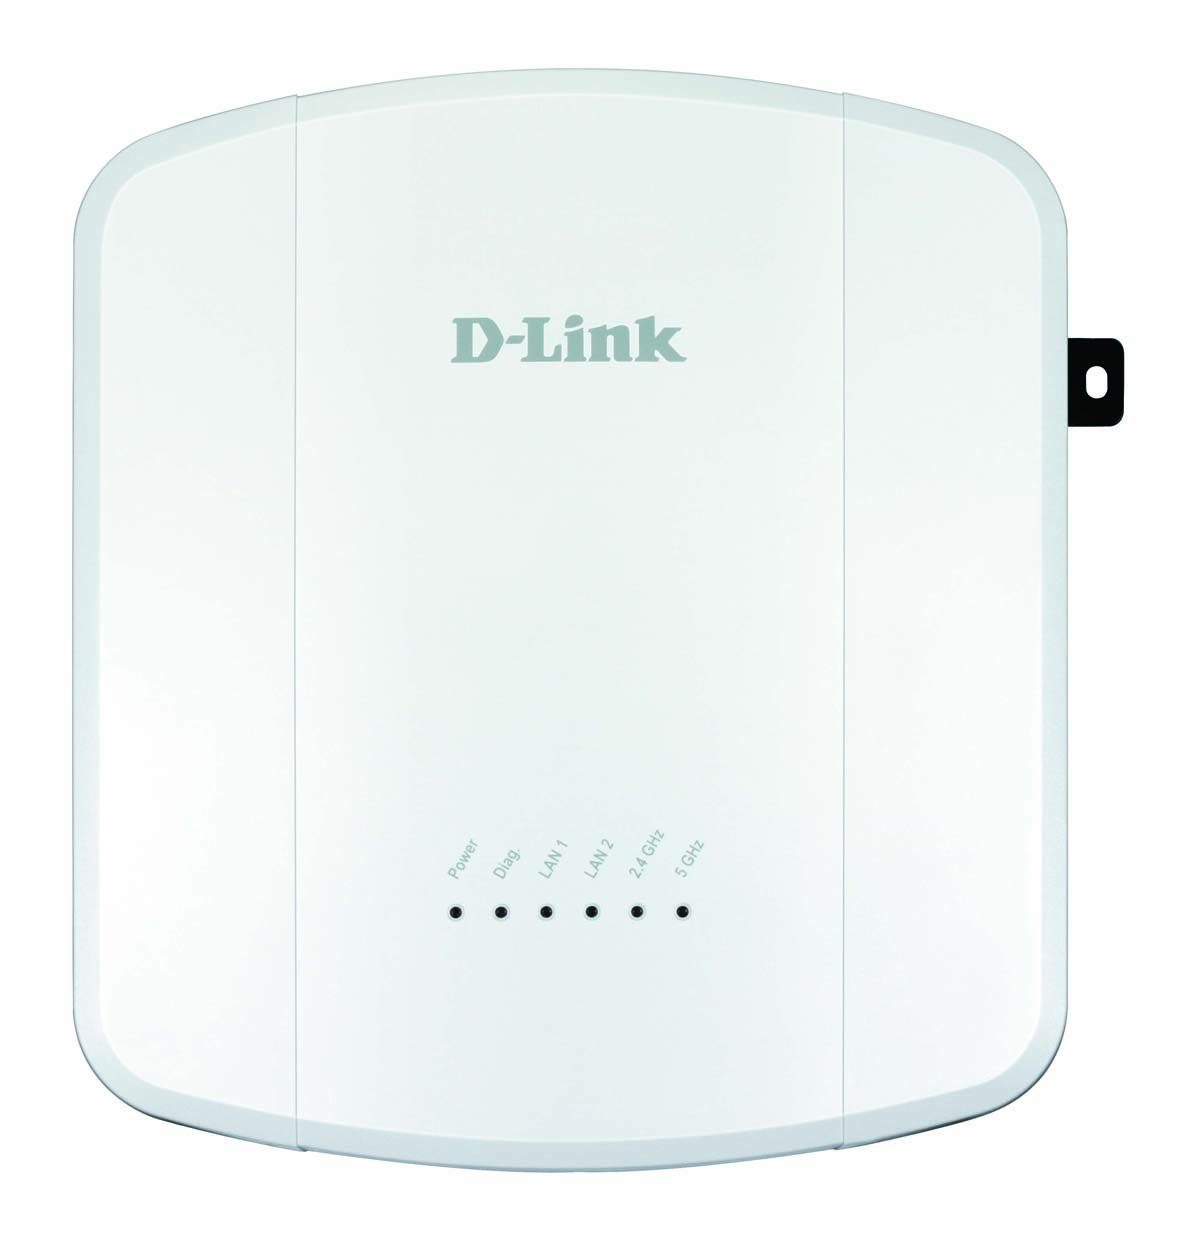 D-Link DWL-8610AP Unified Wireless Access Point